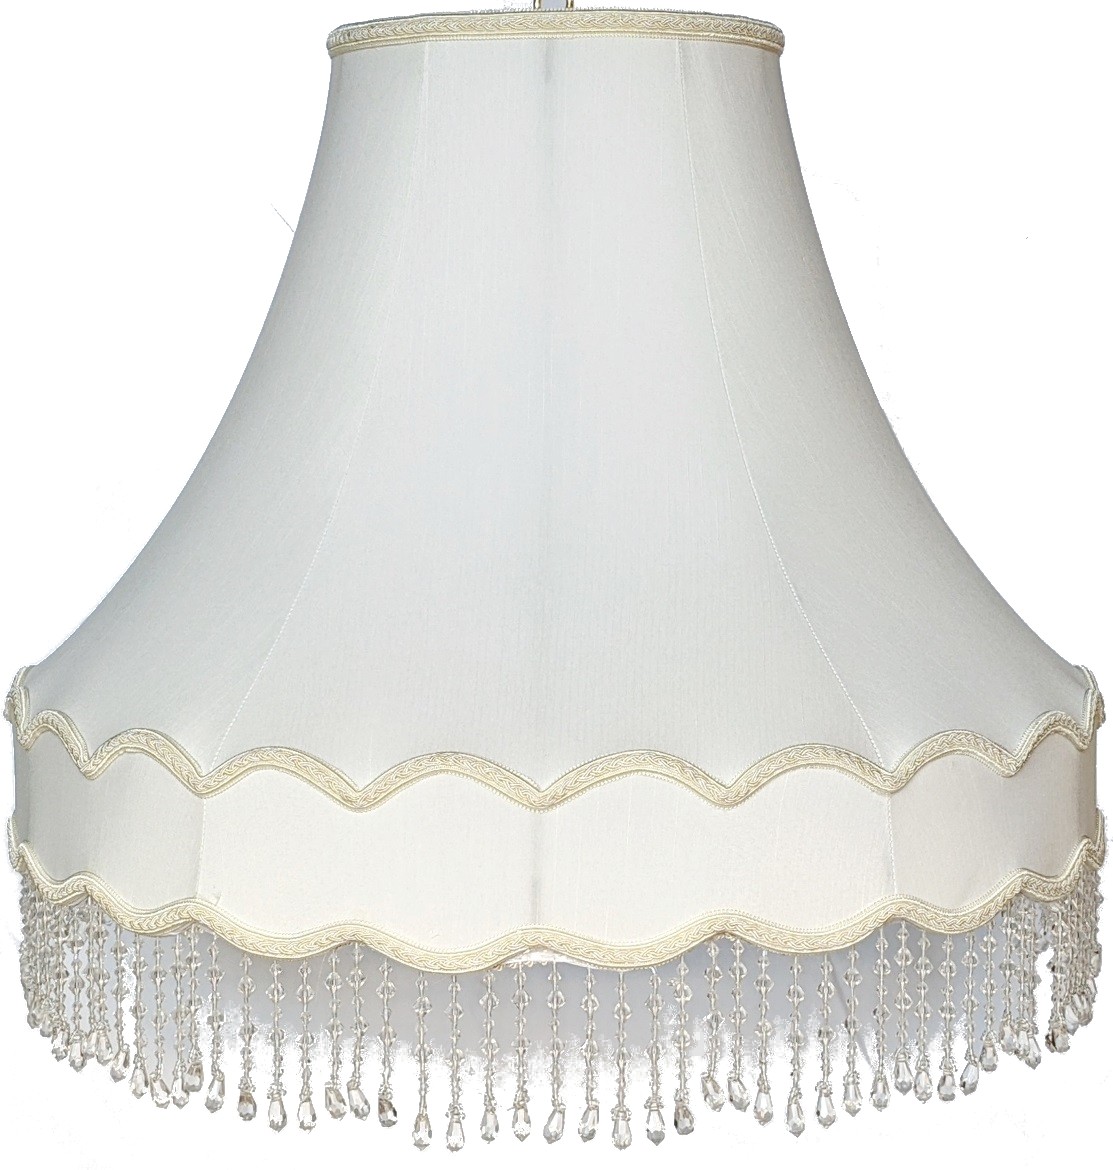 Gallery Bell Victorian Silk Lamp Shade w/Beads & Fringes 14-20"W